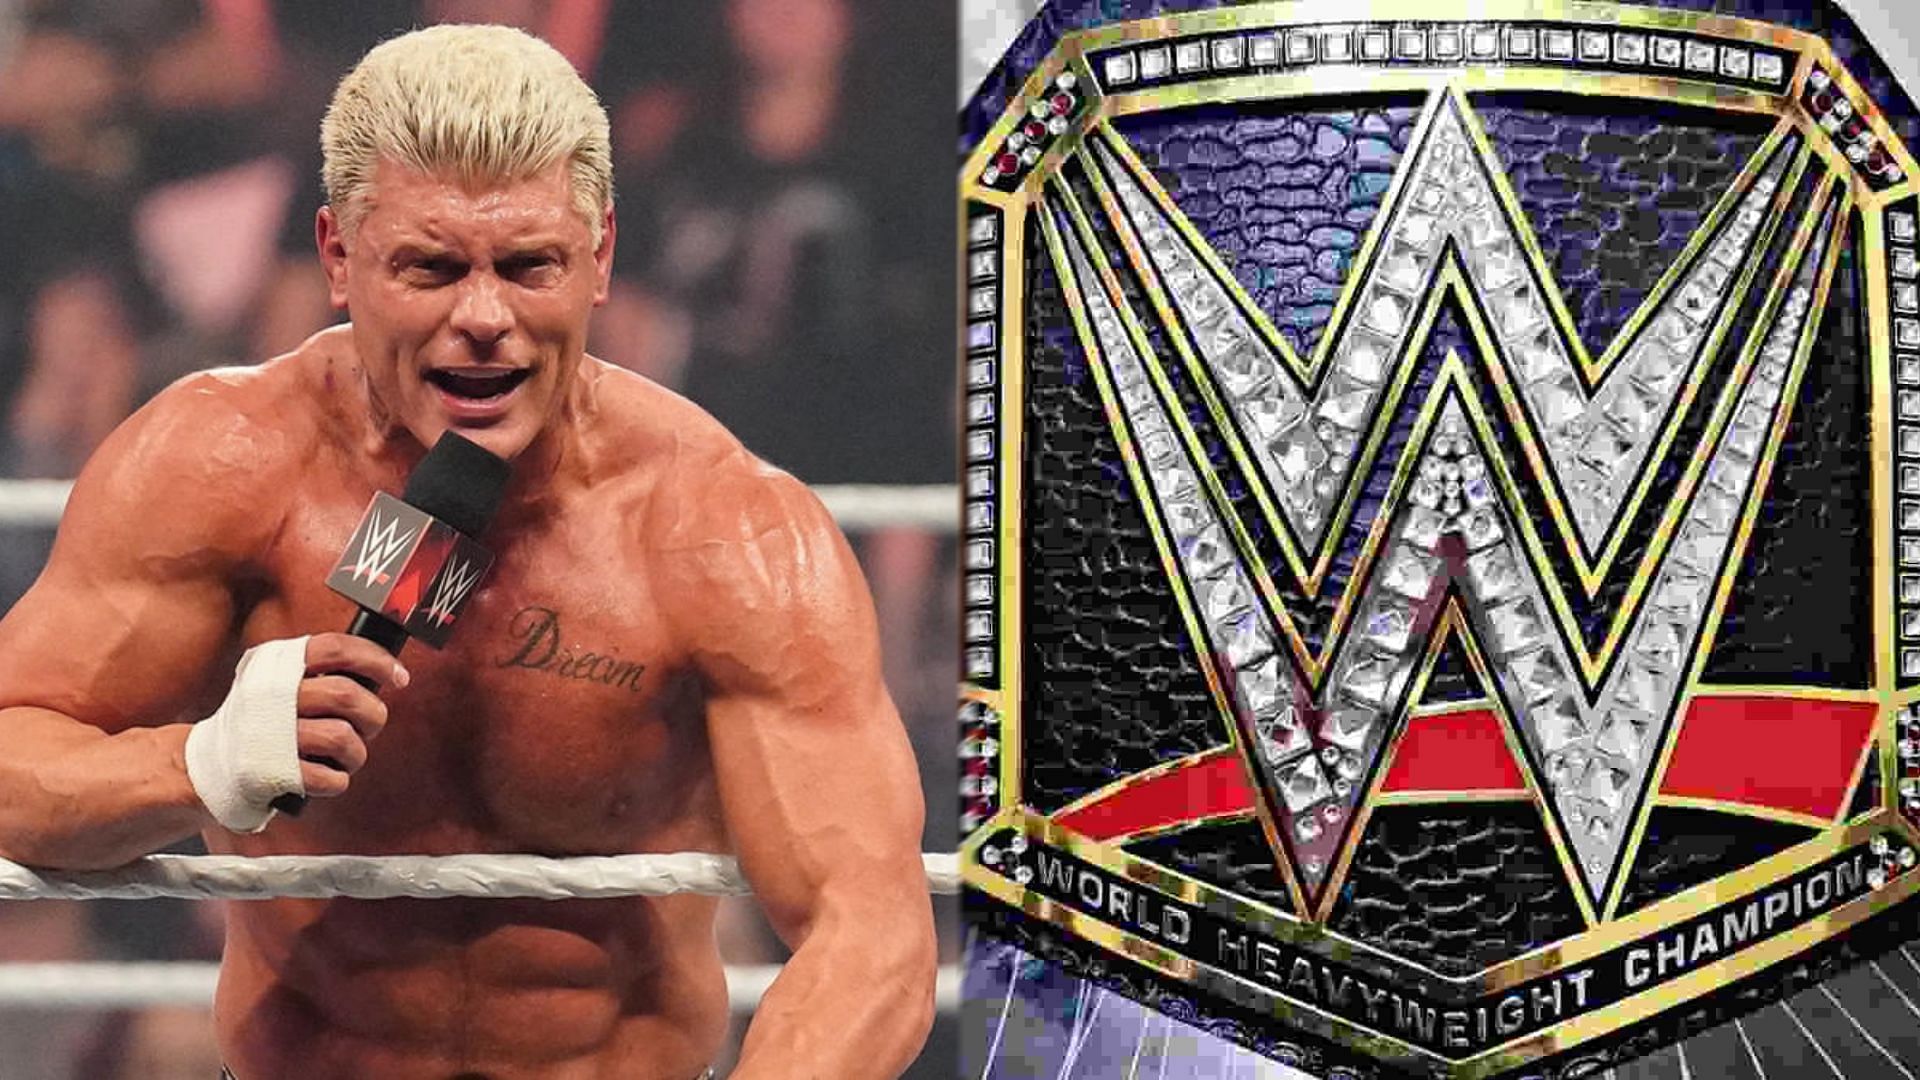 Will Cody Rhodes finally capture the WWE Championship at WrestleMania?